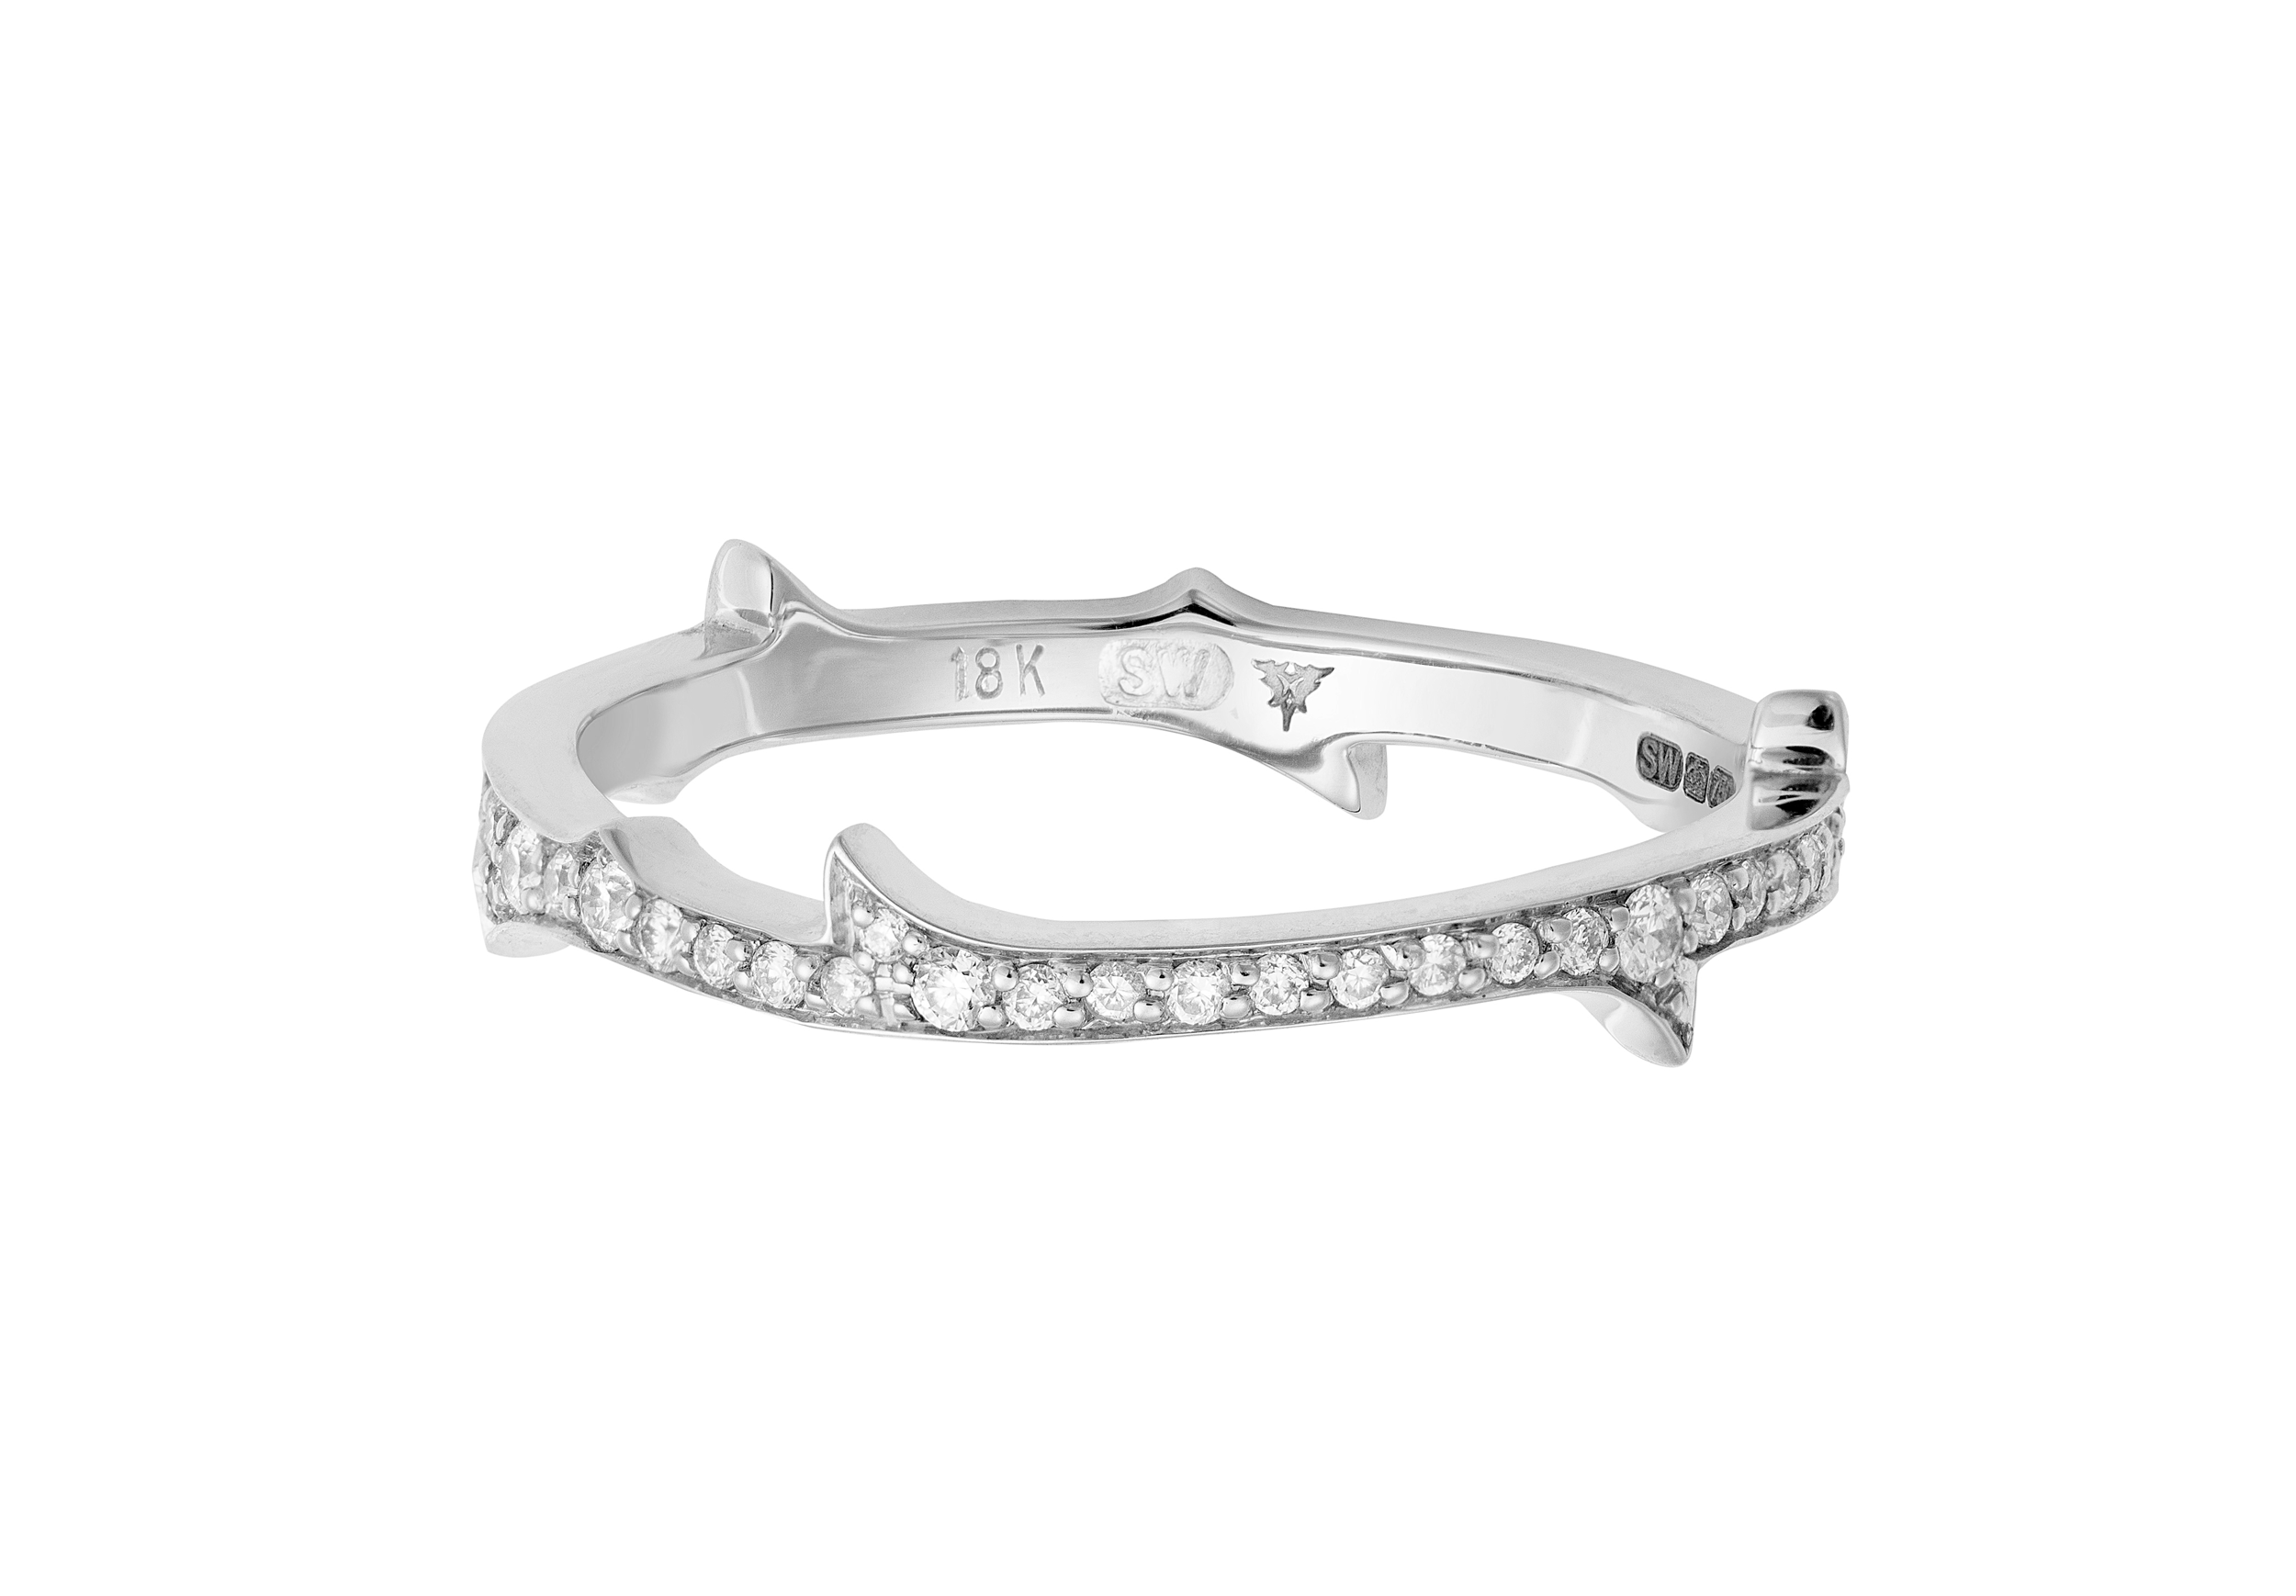 Thorn Stem Slim Band Ring with White Diamonds in 18kt White Gold - Size 7